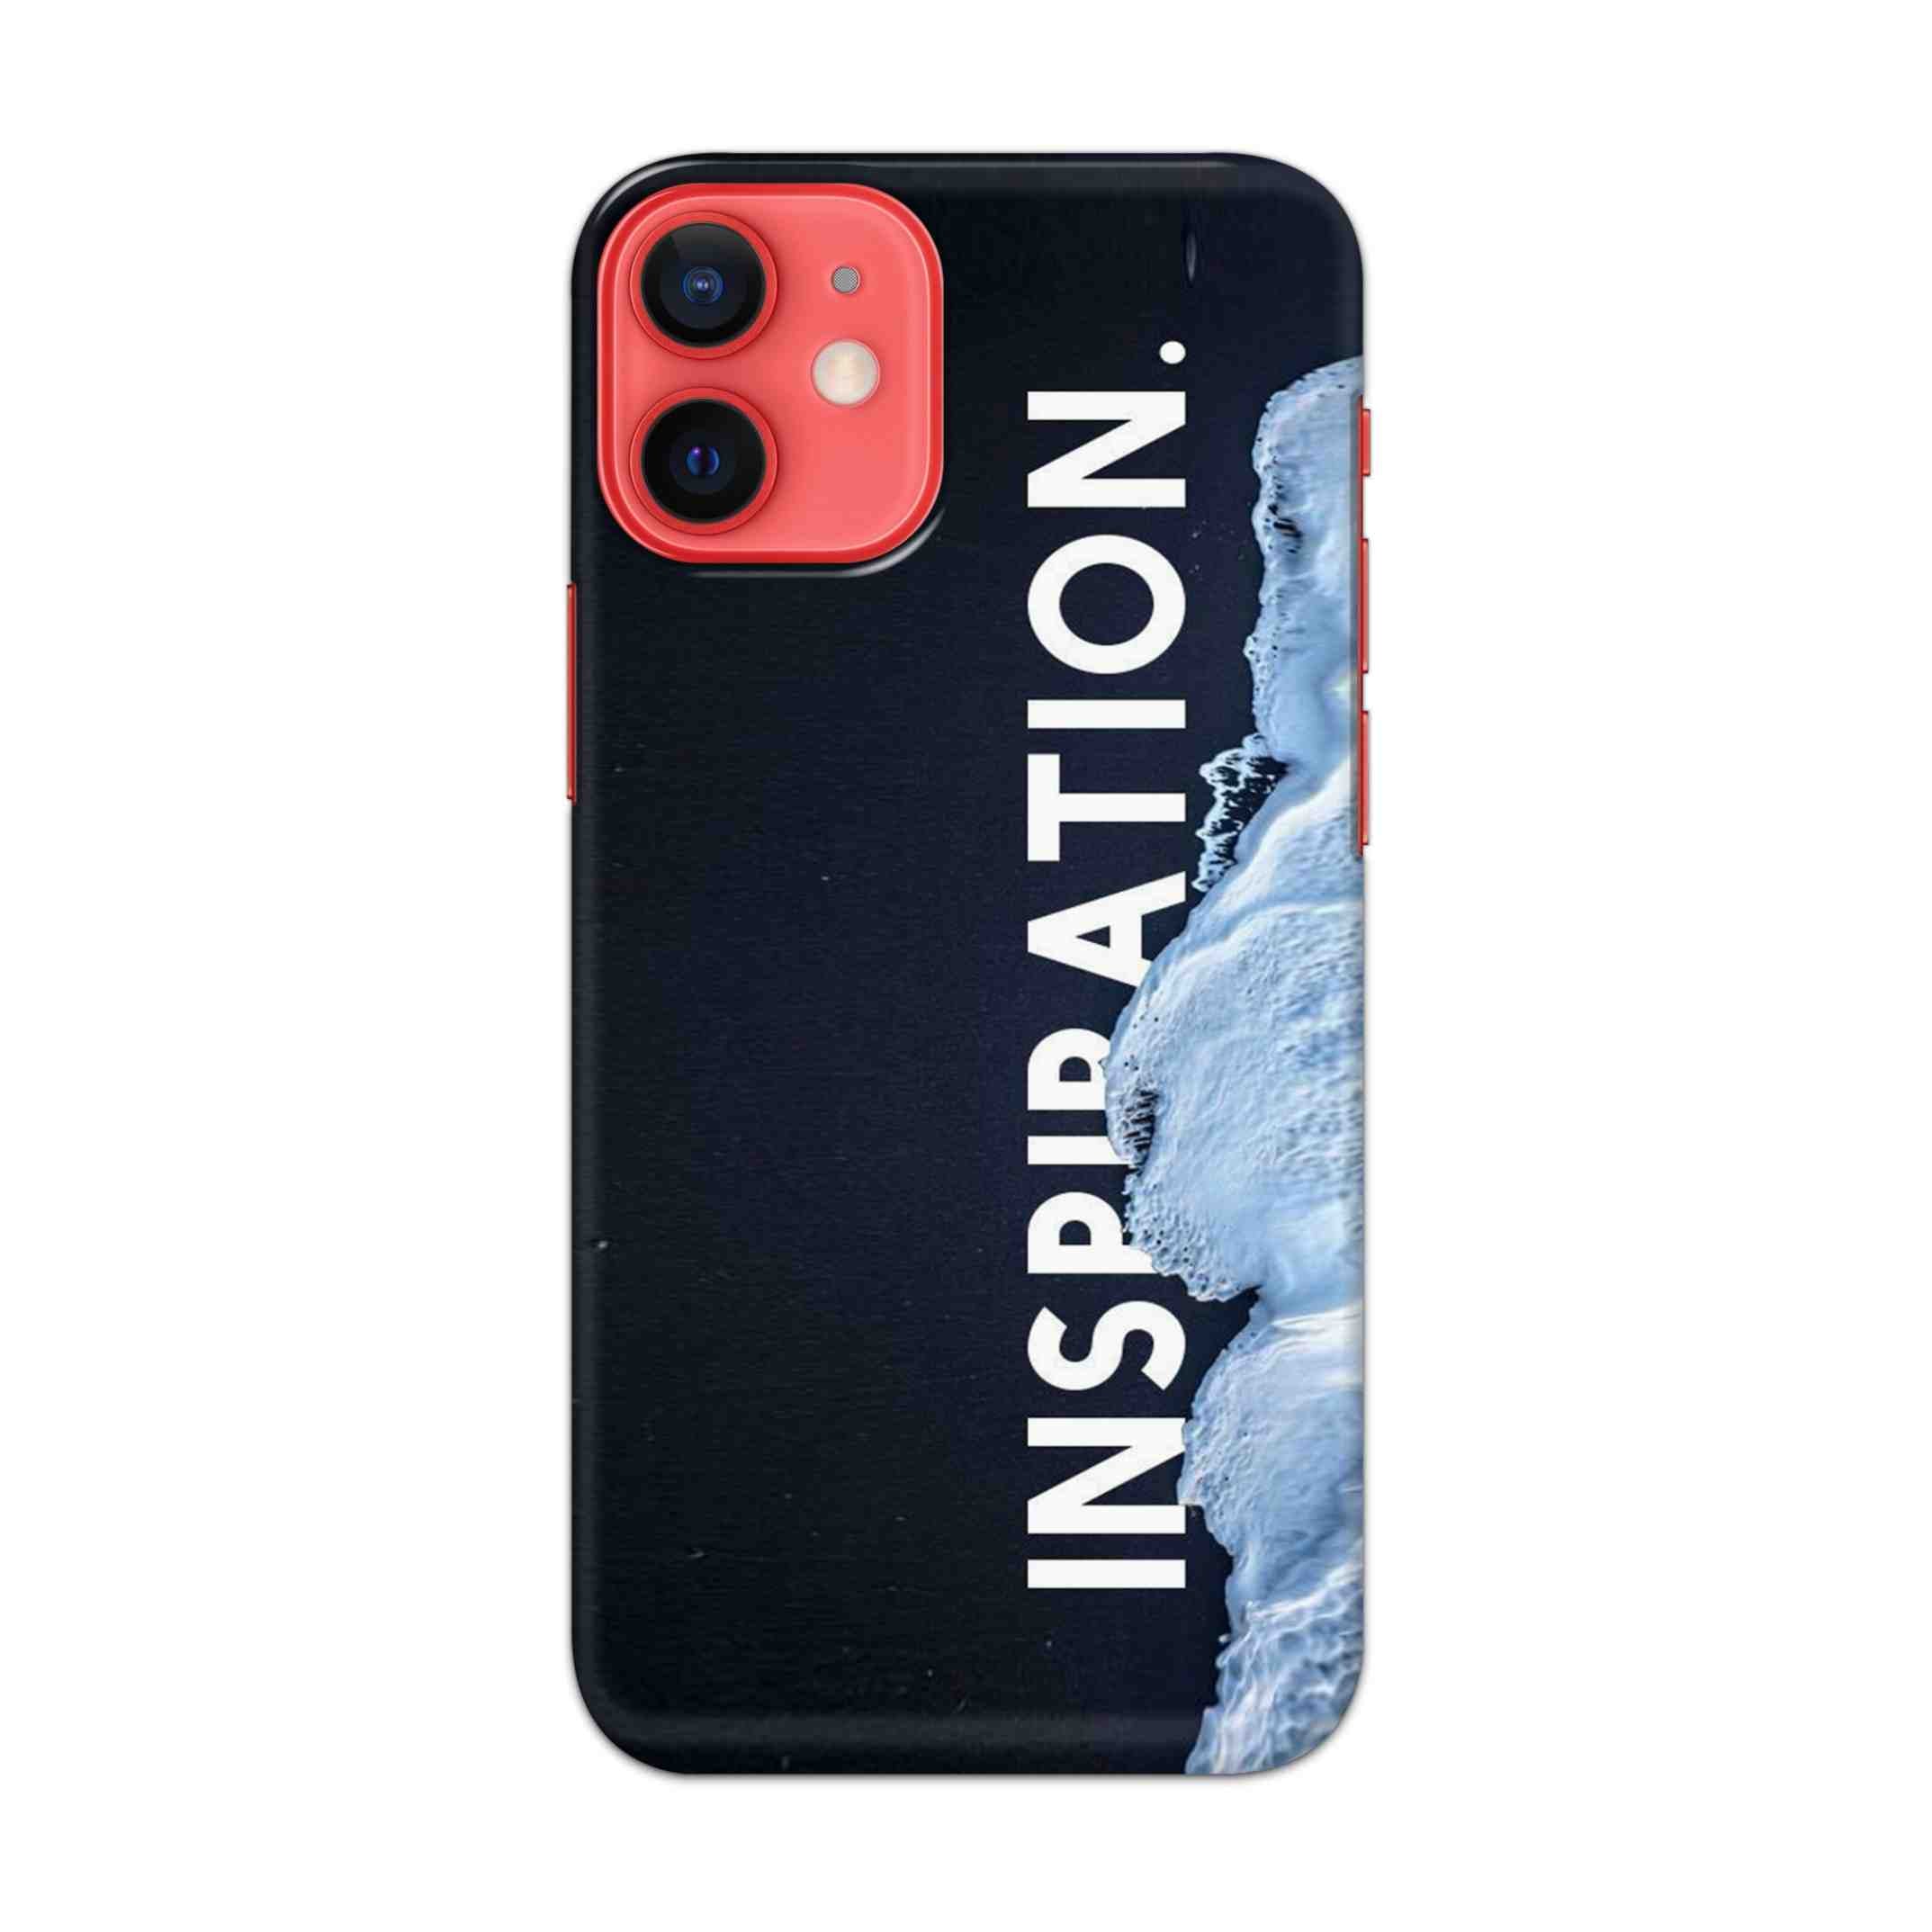 Buy Inspiration Hard Back Mobile Phone Case/Cover For Apple iPhone 12 mini Online